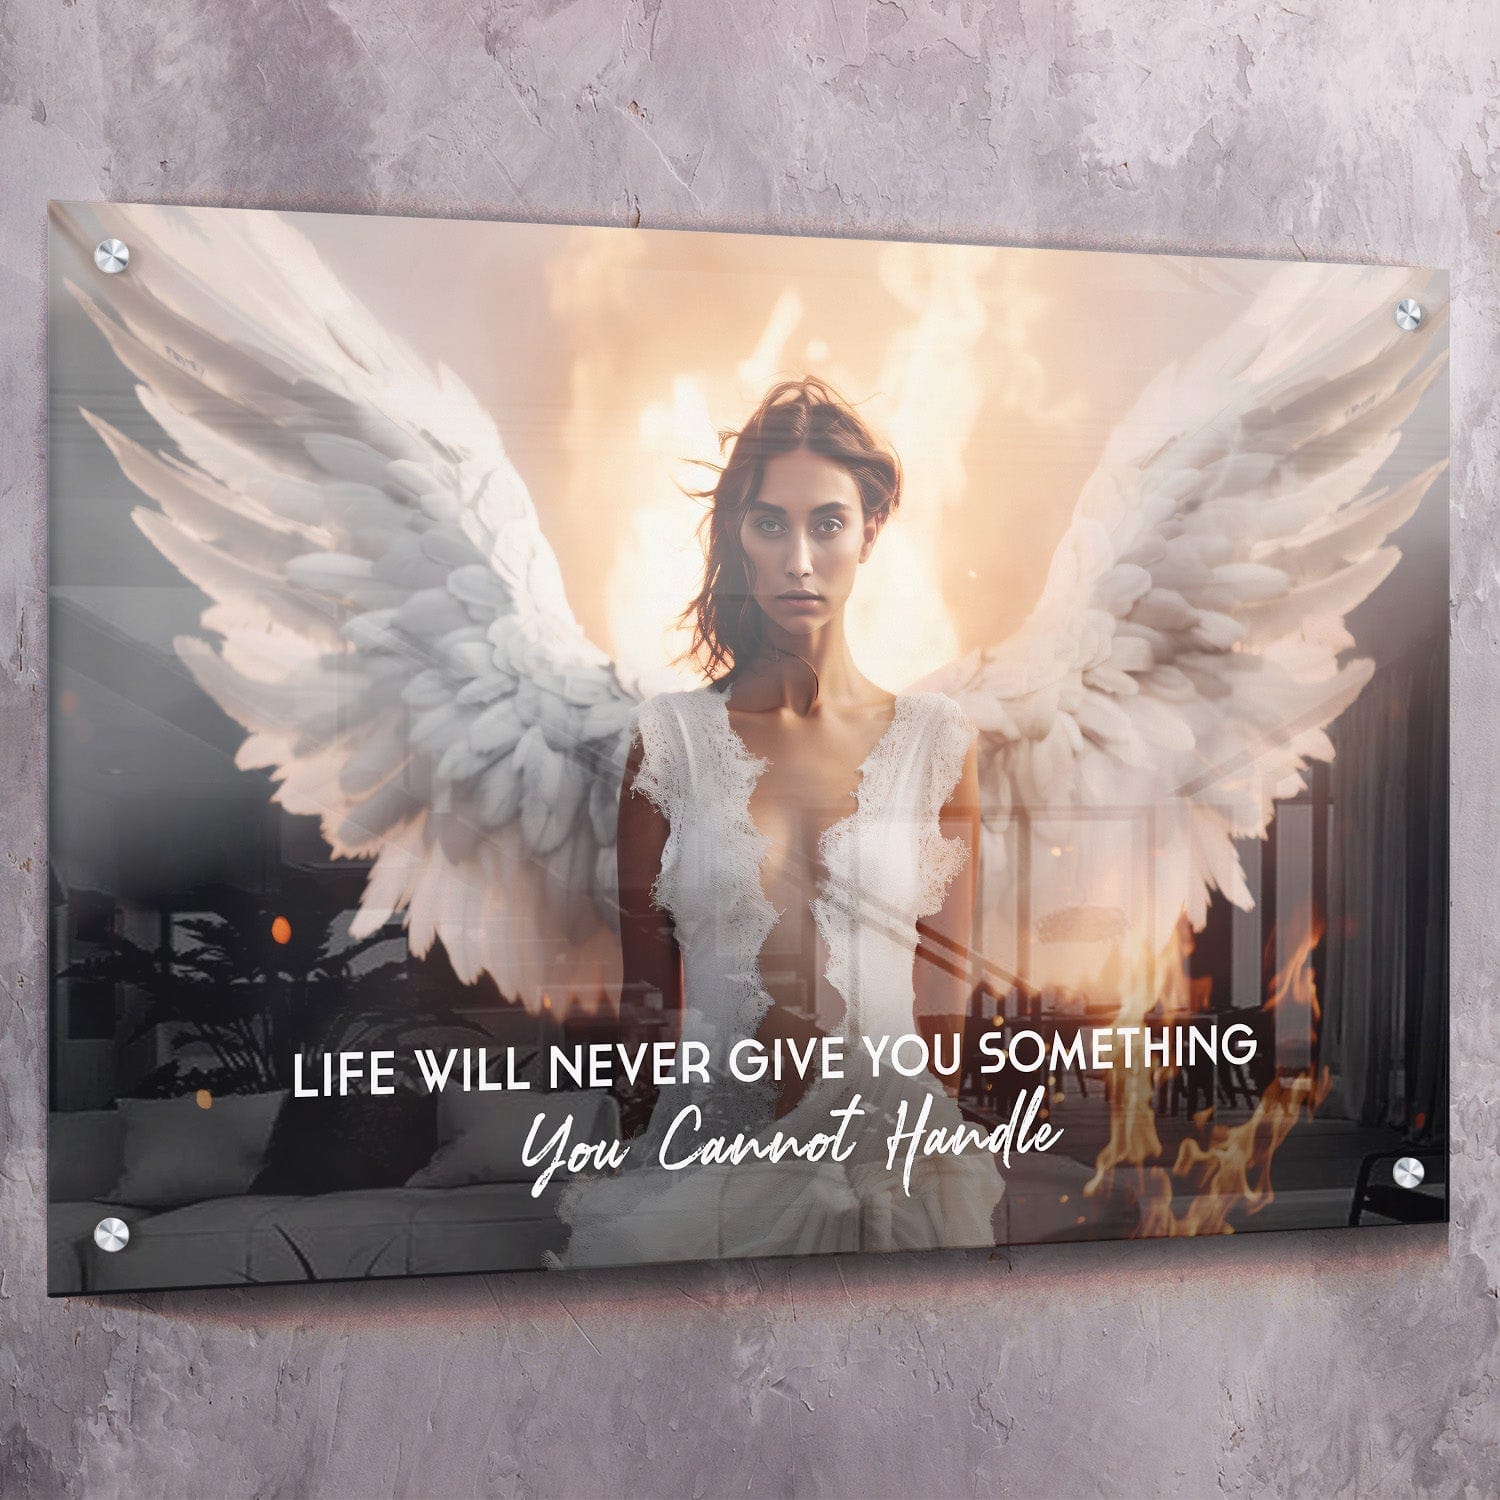 Life Will Never Give You Wall Art | Inspirational Wall Art Motivational Wall Art Quotes Office Art | ImpaktMaker Exclusive Canvas Art Landscape